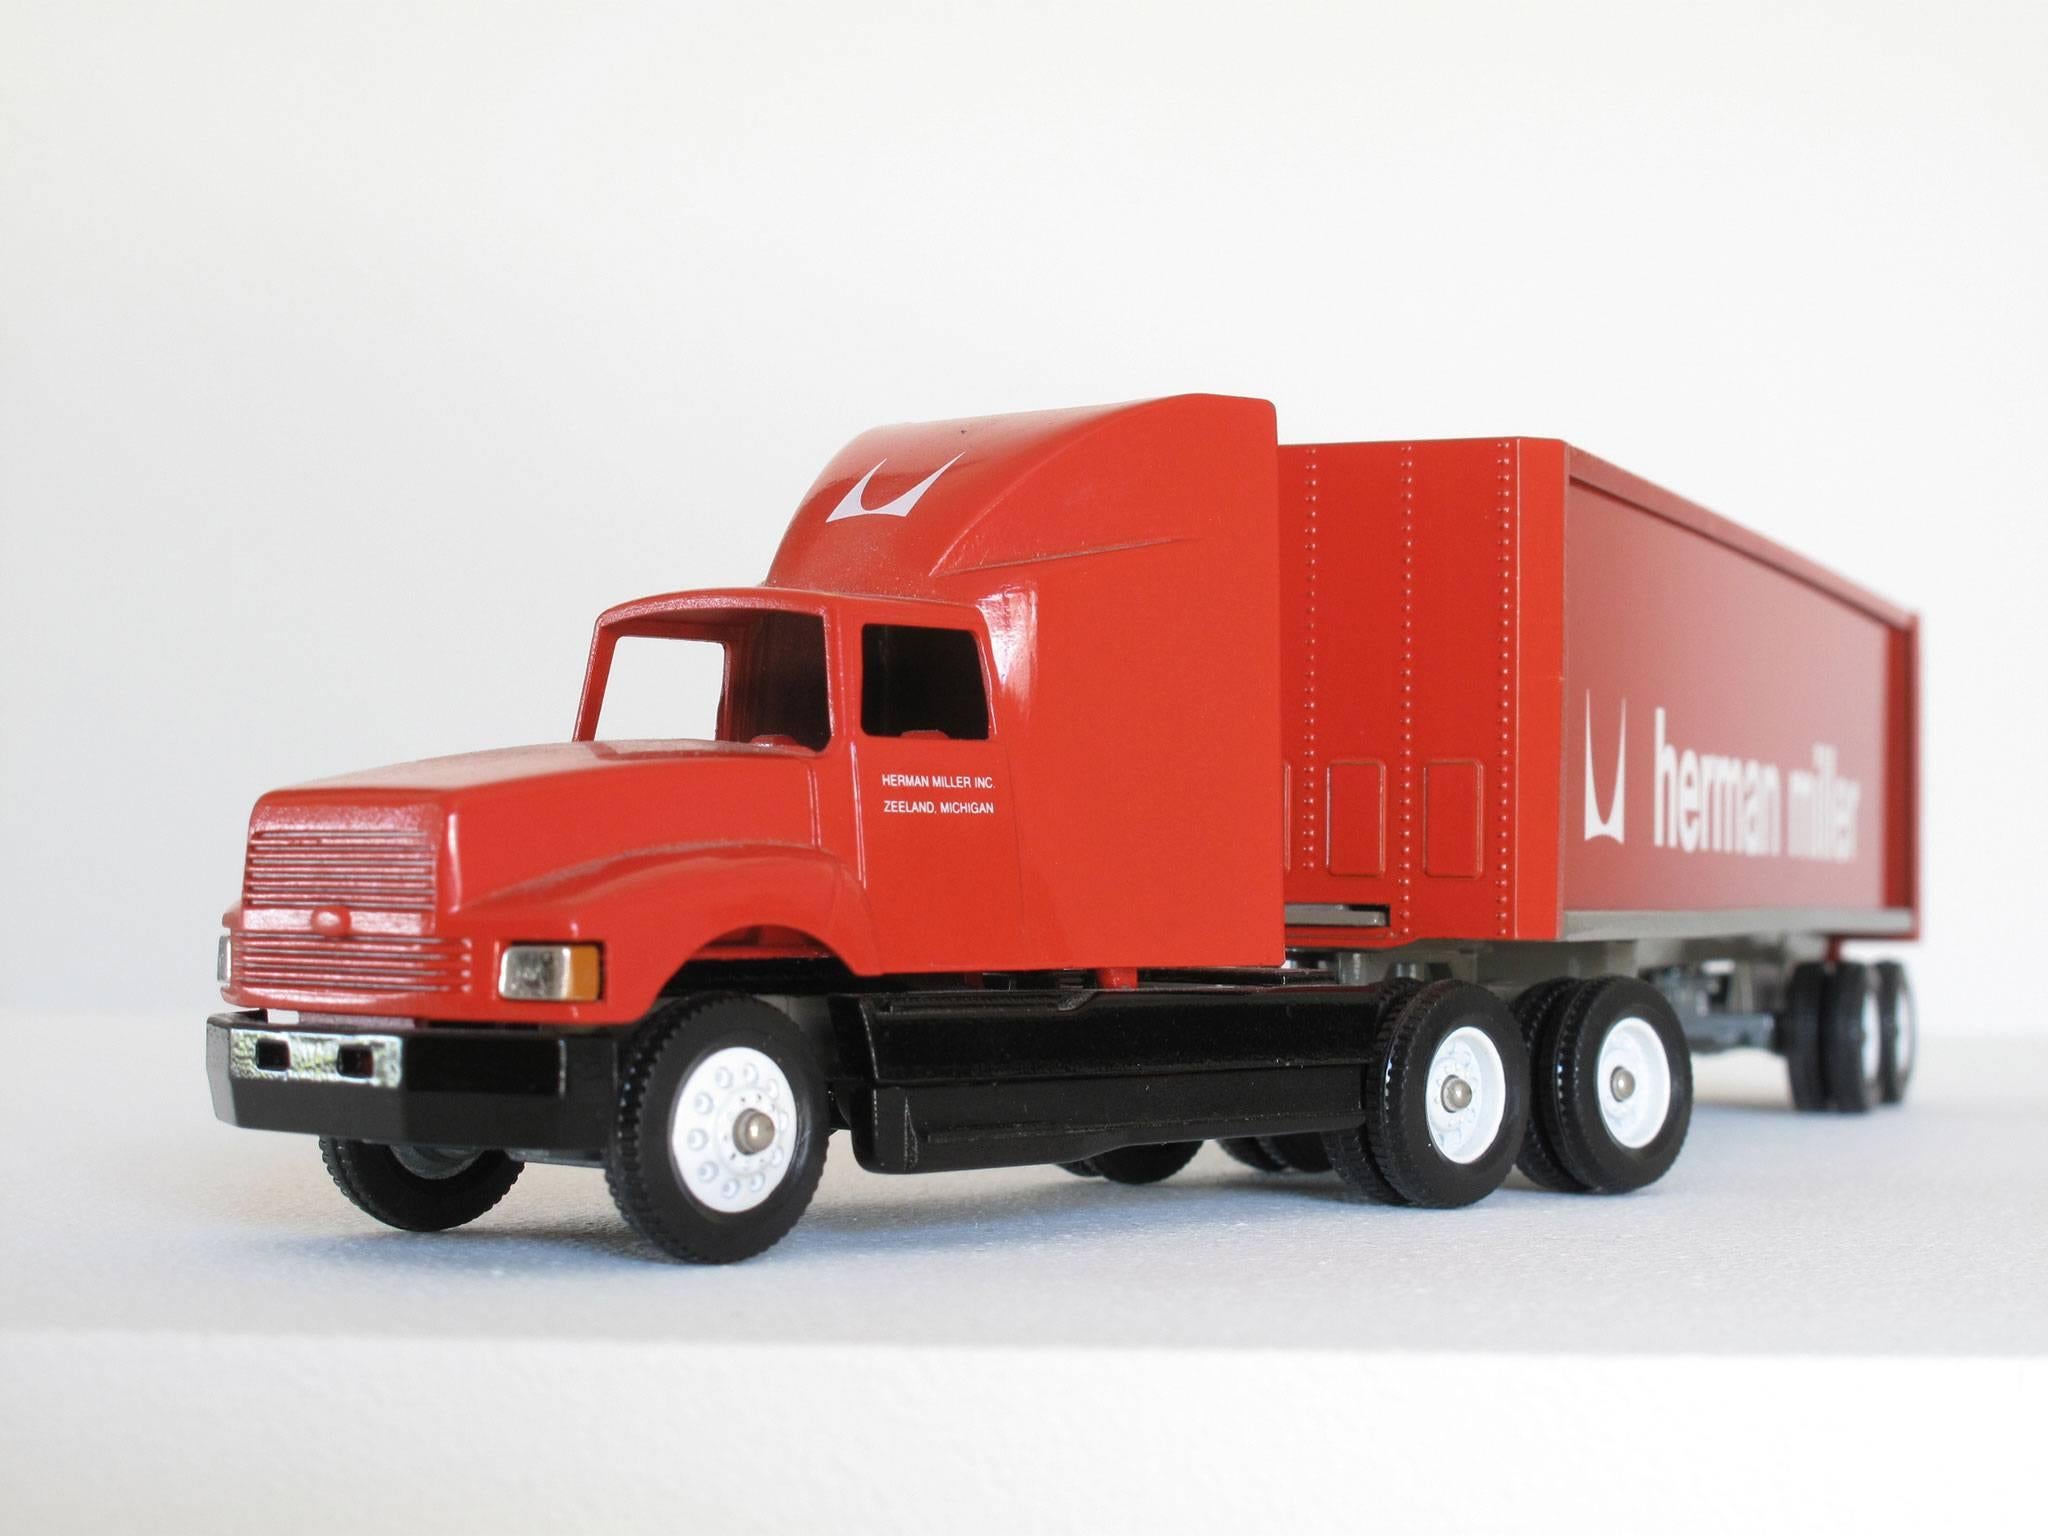 Fun, collectible Herman Miller miniature truck advertising, 1:64 scale model, red semi-truck with cab and trailer and white logos, made of die cast metal, paint, plastic.
Dimensions: 2 3/8 high x 10 3/4 wide x 1 1/2 deep inches.
Condition: Good